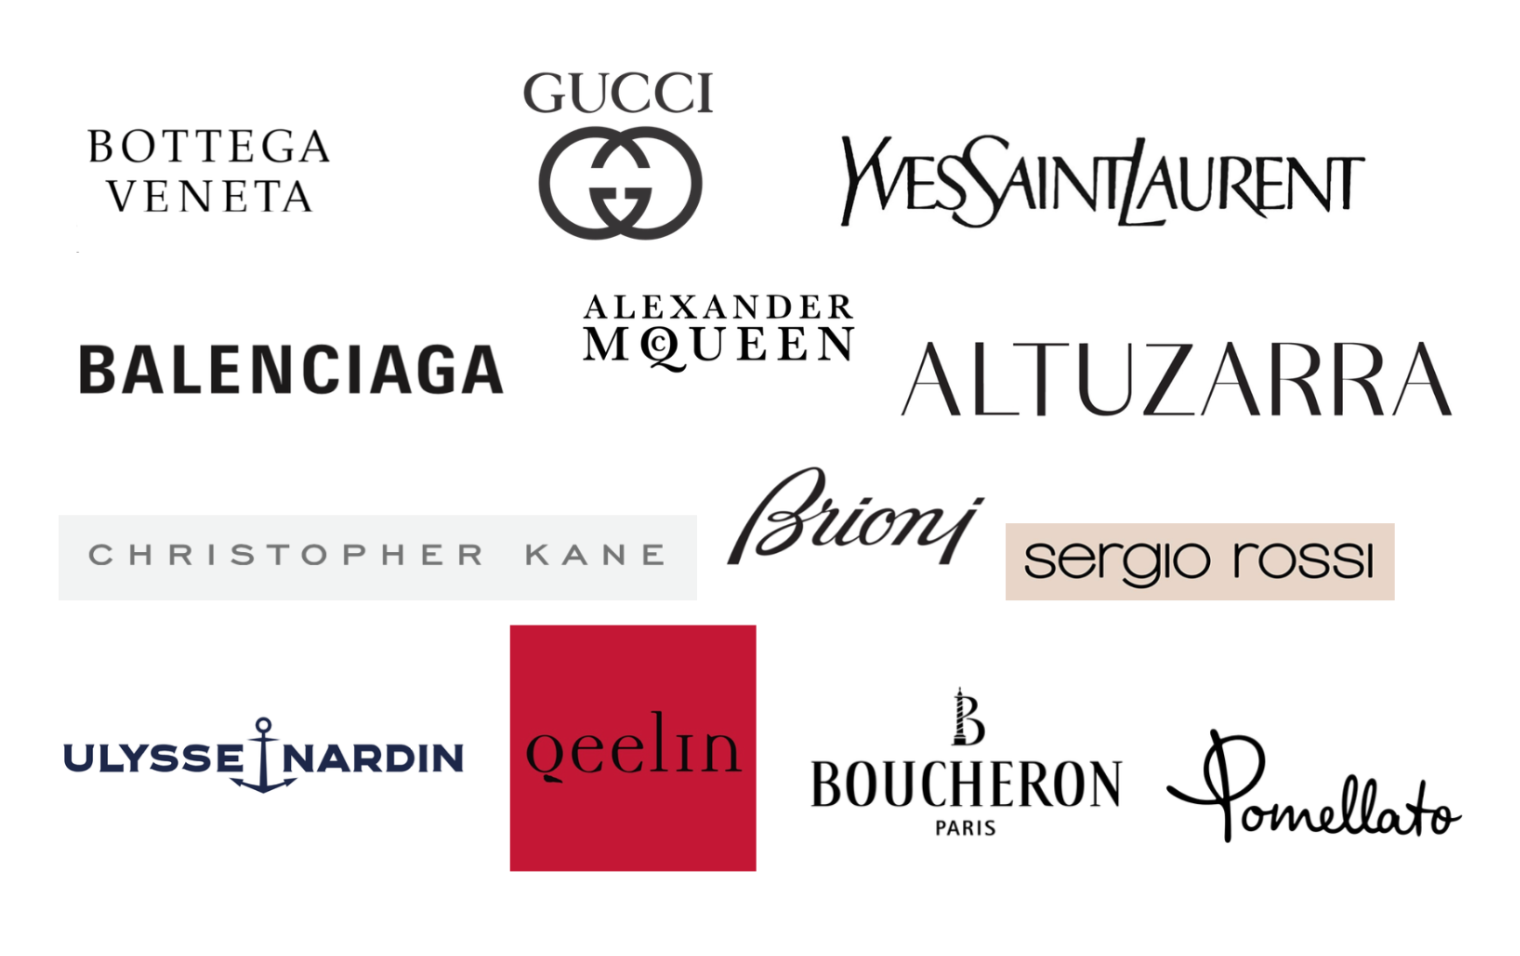 Kering: A Timeline Behind the Building of a Luxury Goods Conglomerate - The  Fashion Law